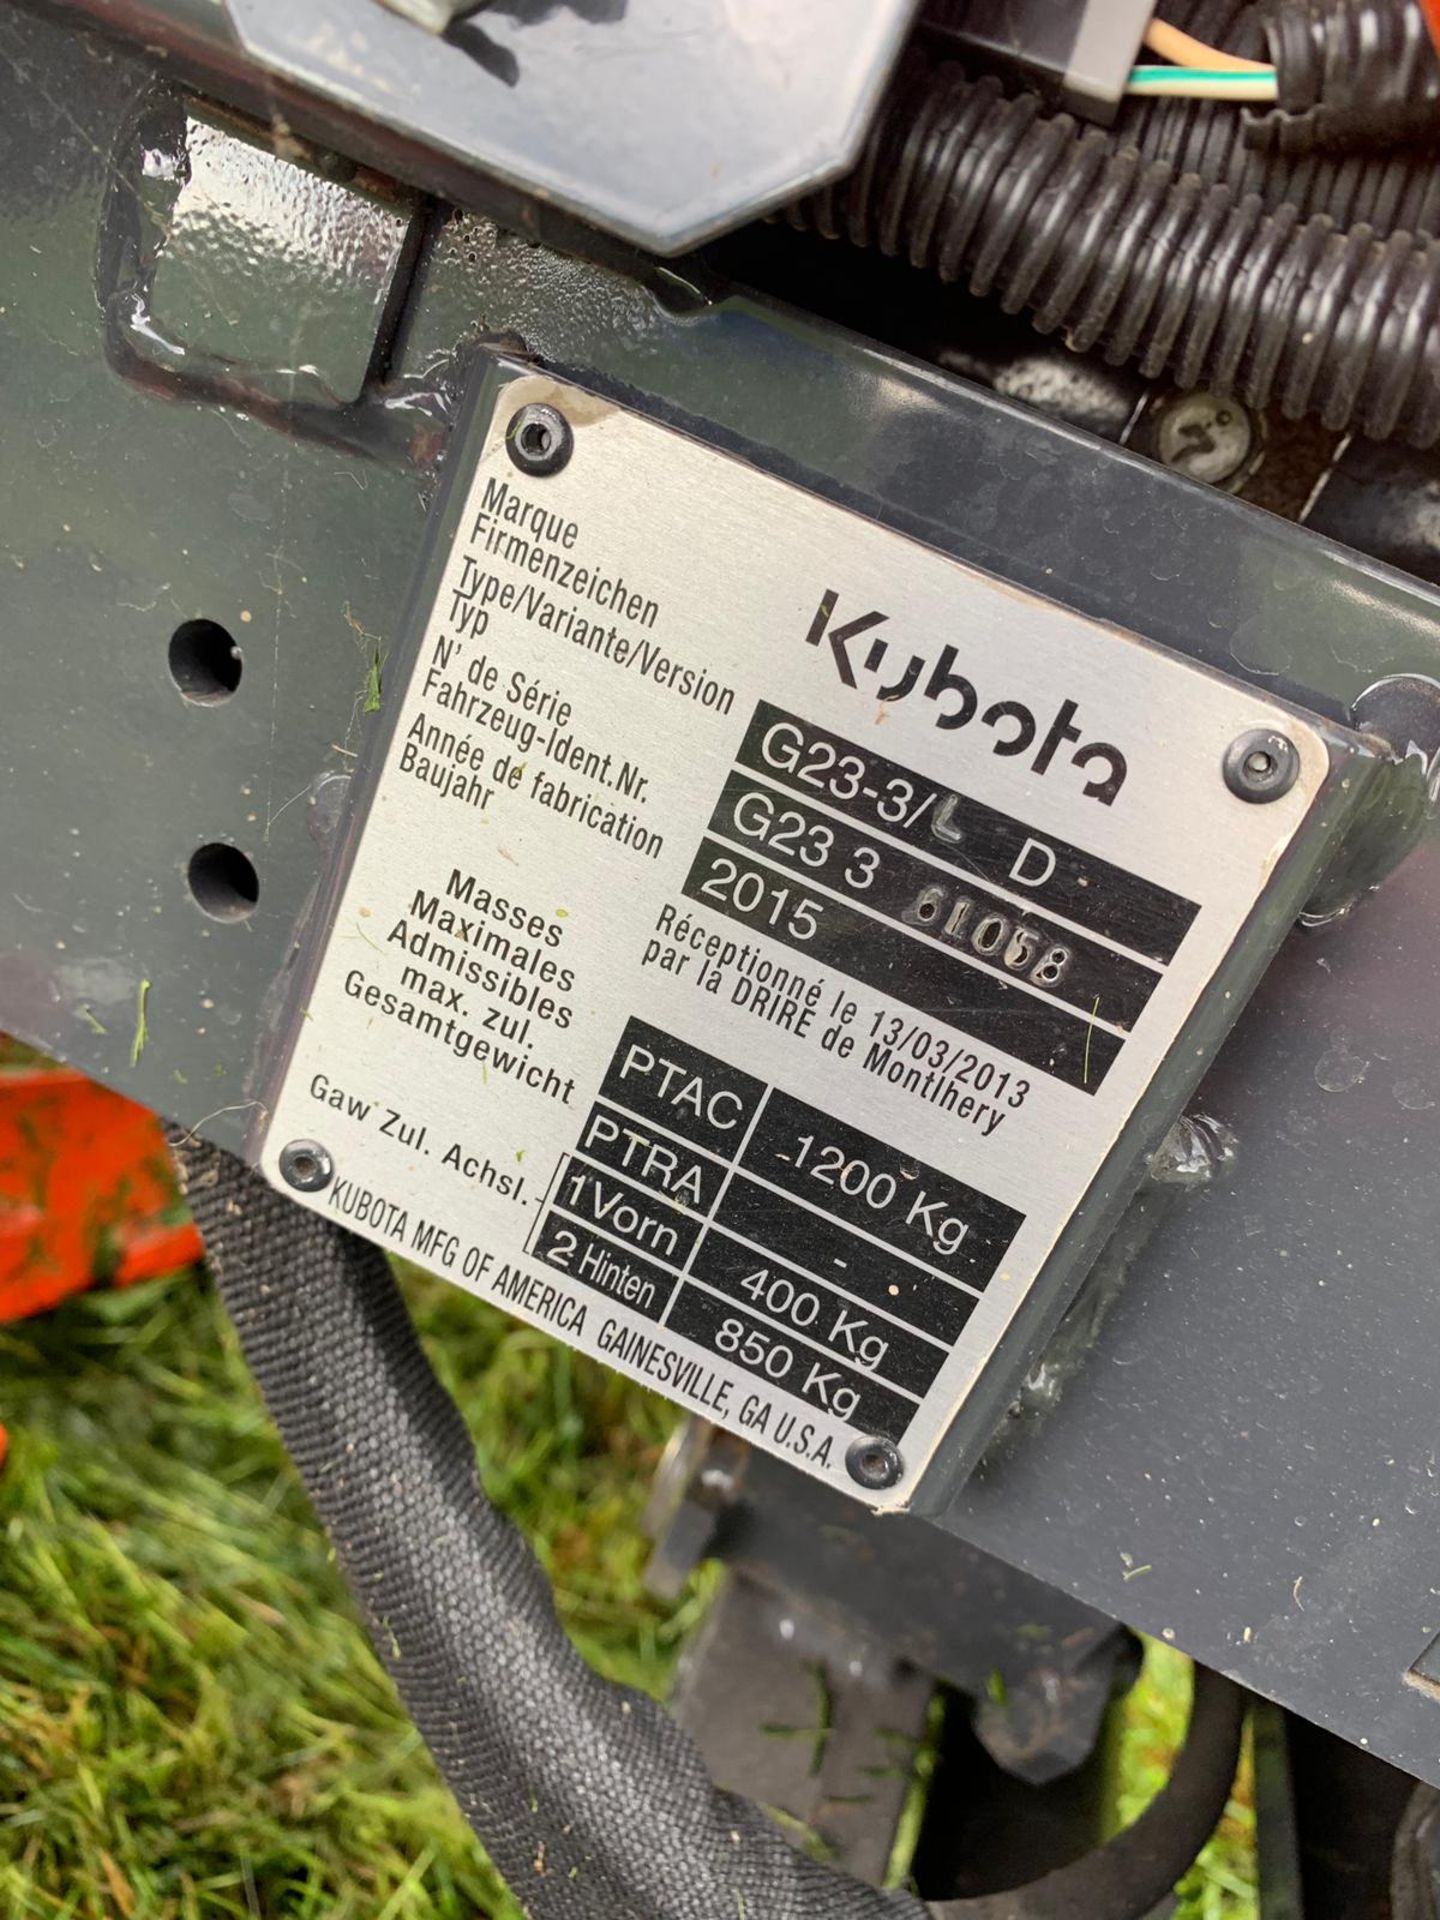 2015 KUBOTA G23-II TWIN CUT LAWN MOWER WITH ROLL BAR, HYDRAULIC TIP, LOW DUMP COLLECTOR *PLUS VAT* - Image 15 of 15